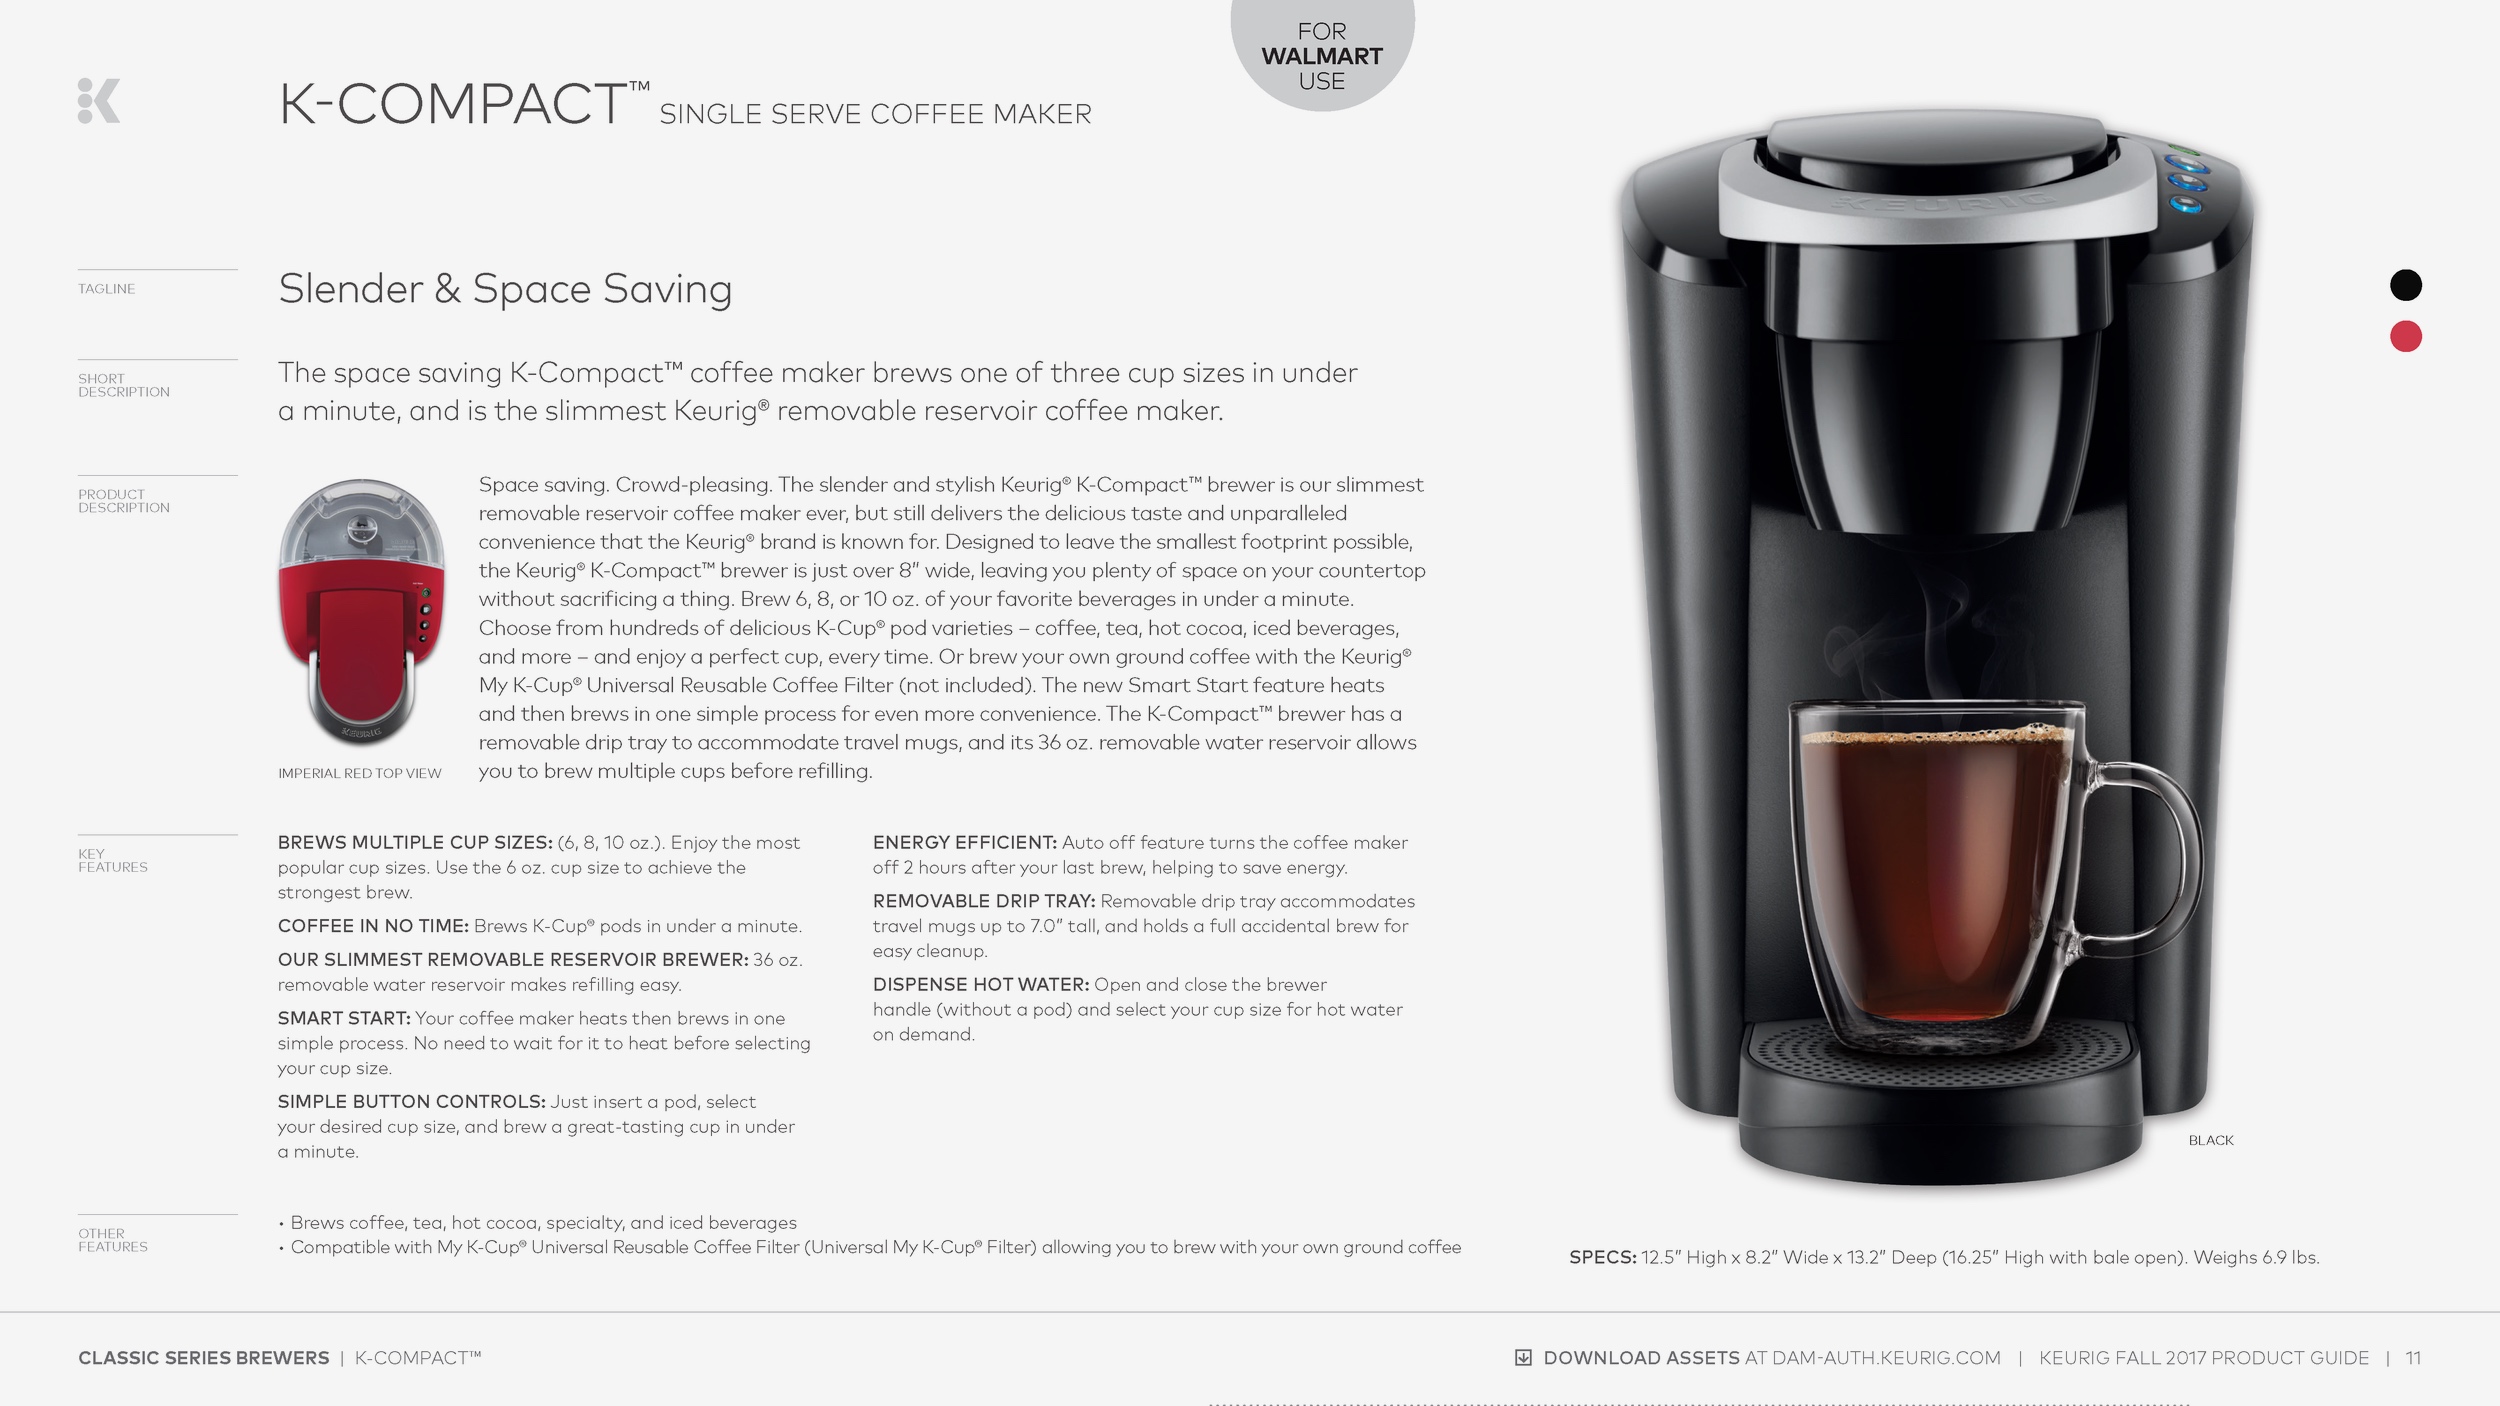 keurig_product_guide_F17_R8_Page_11.png